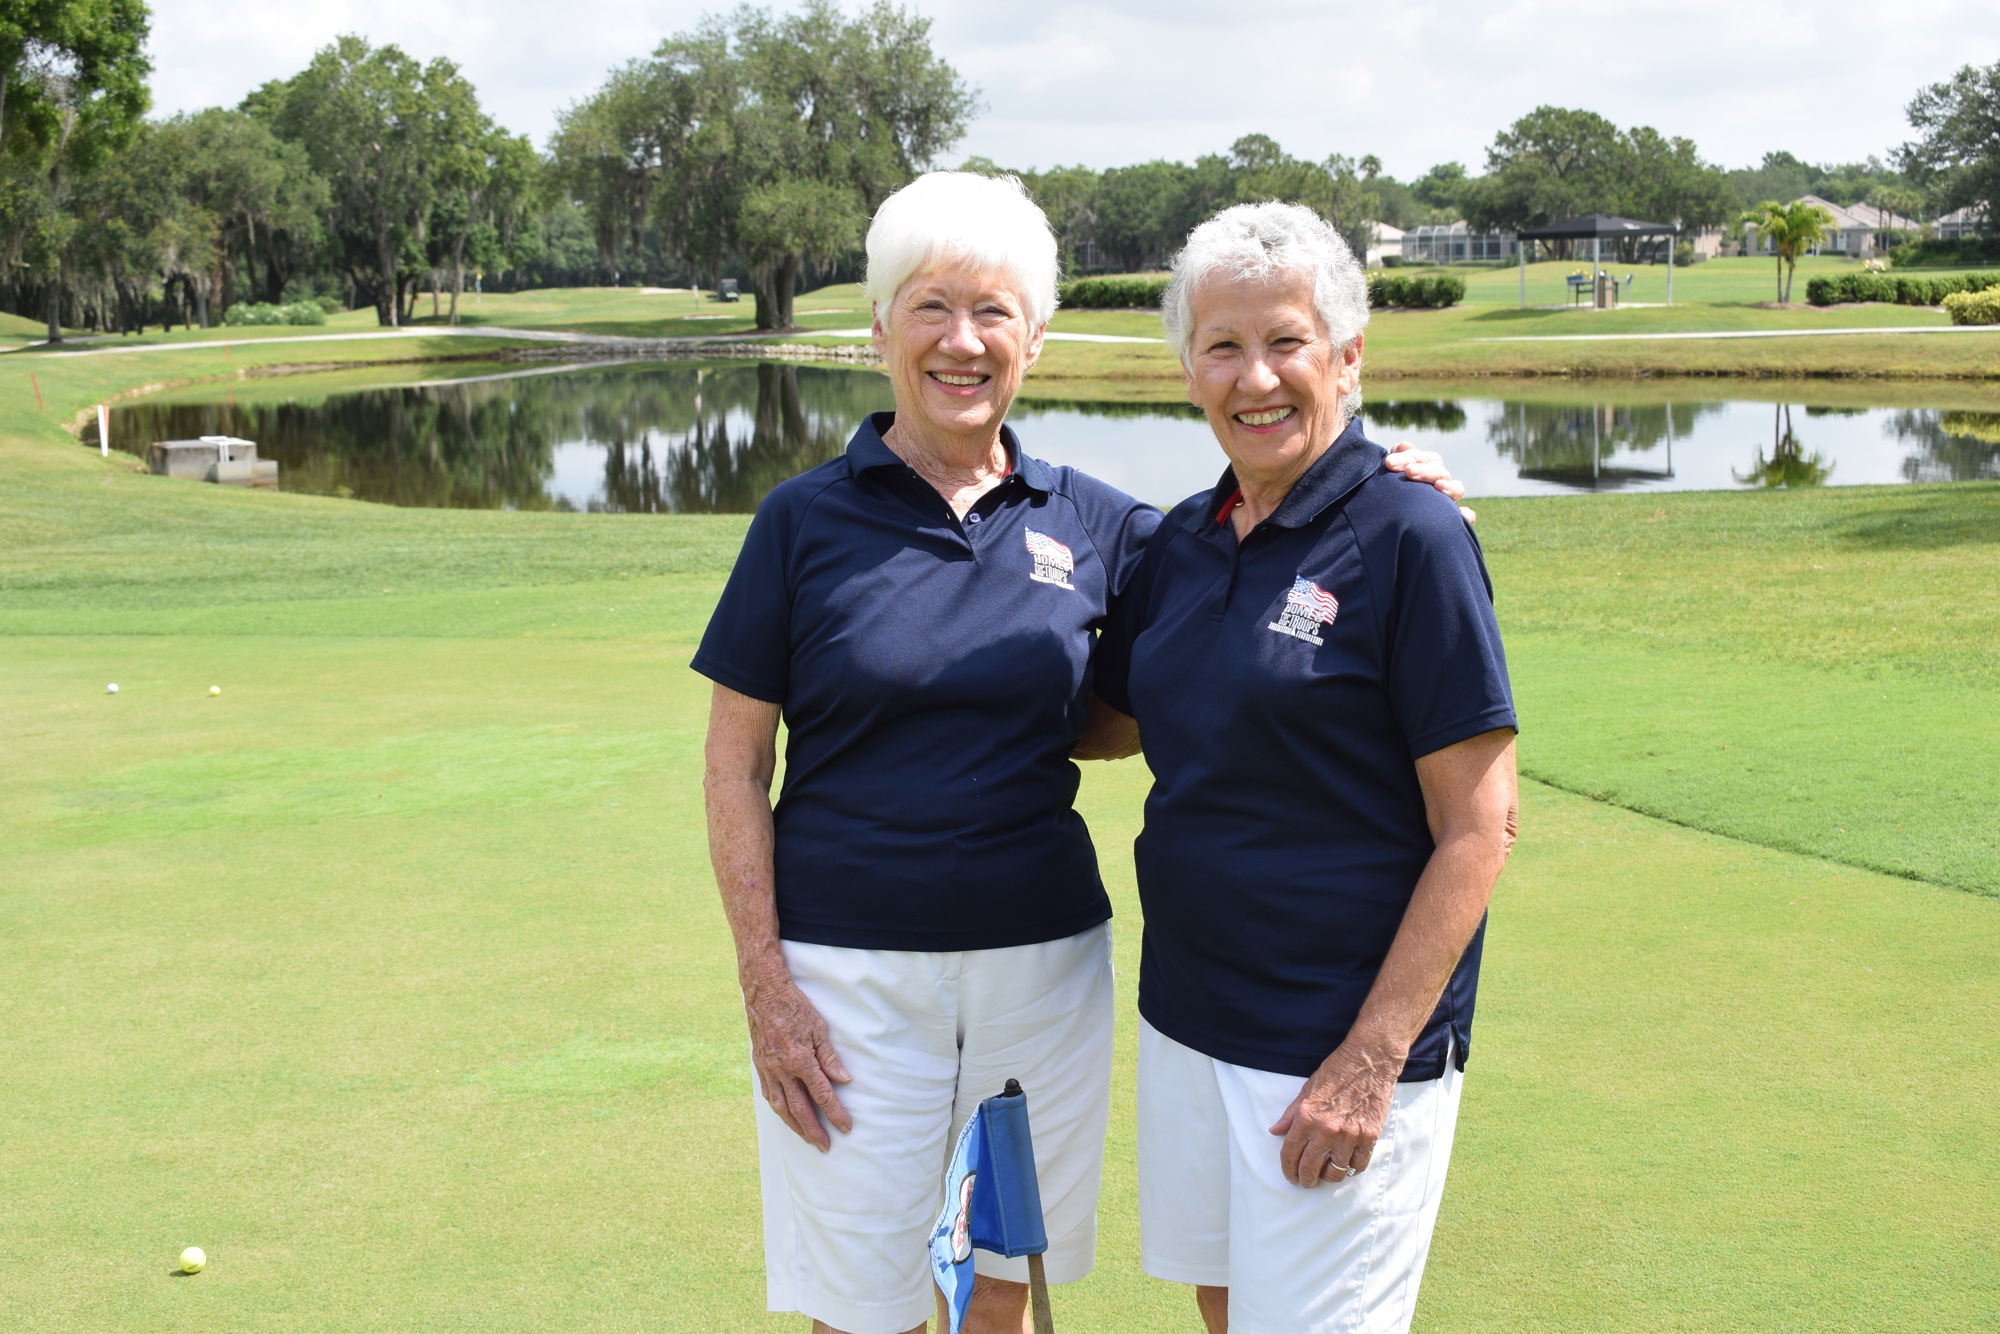 Kathi Skelton and Deb Kehoe have run the  Rosedale Golf Classic to benefit Homes for Our Troops since 2014.